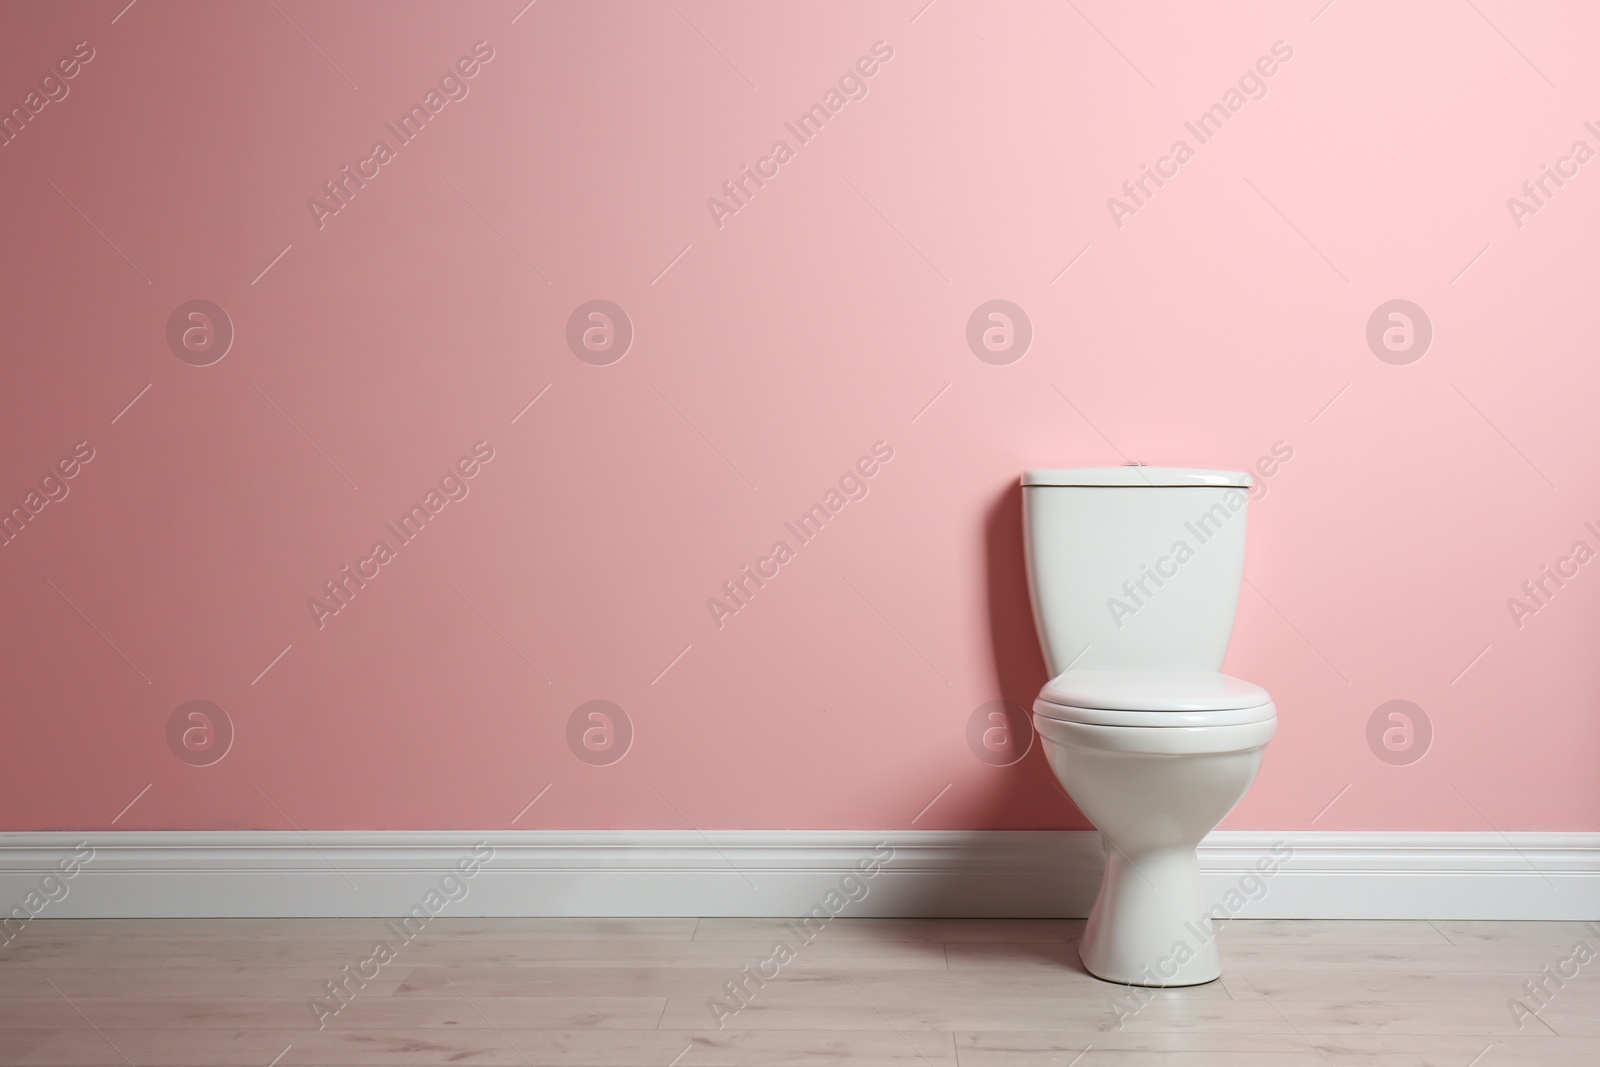 Photo of New ceramic toilet bowl near color wall with space for text